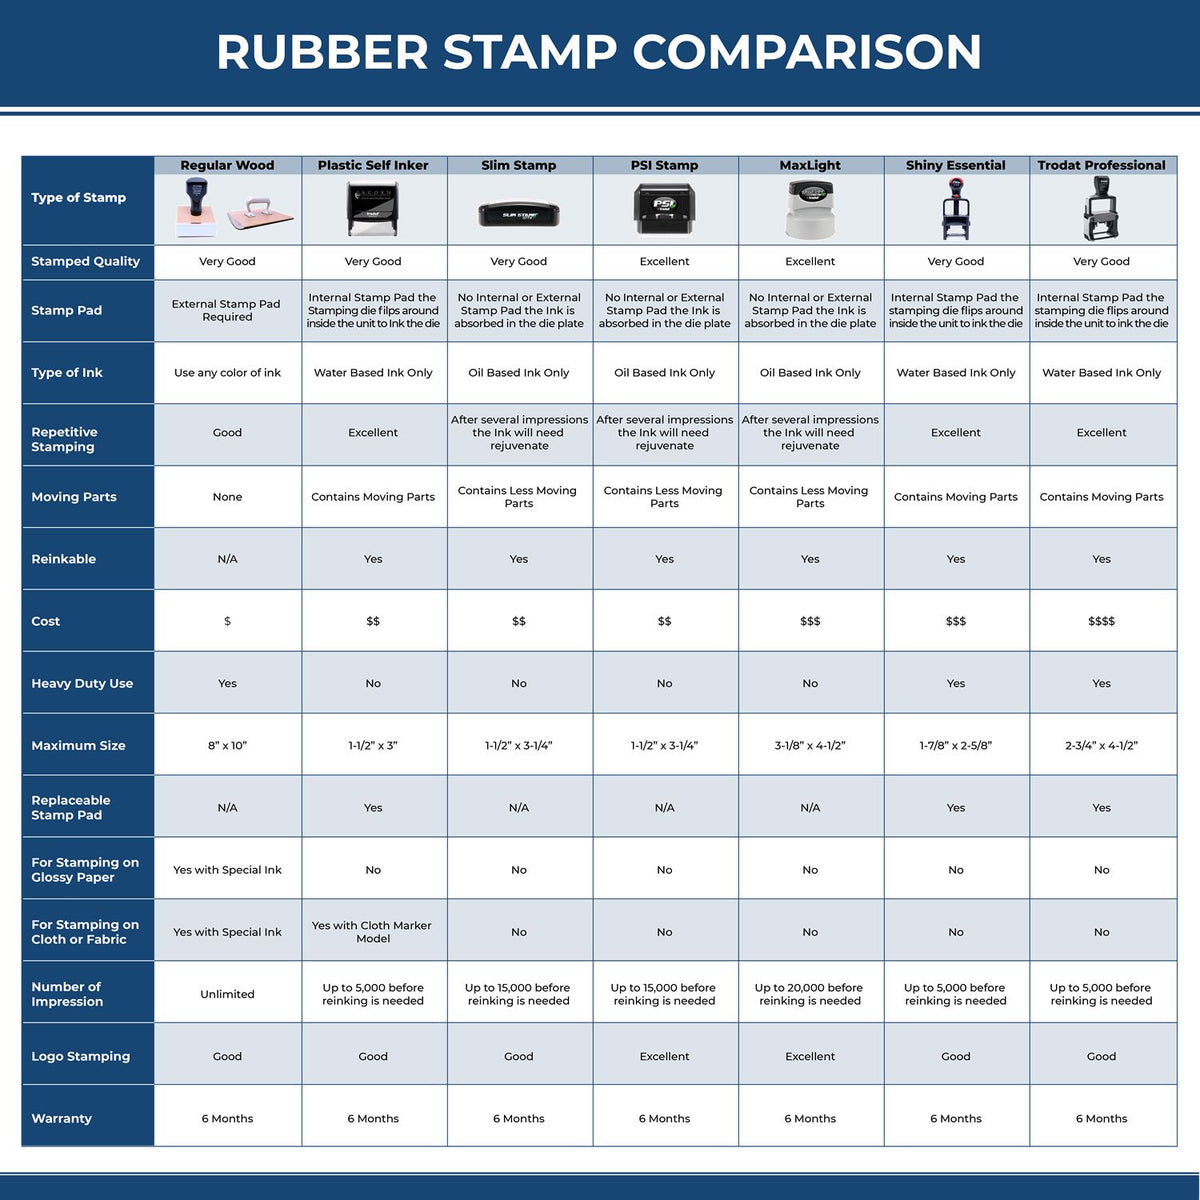 Large Self-Inking Copia Stamp 5524S Rubber Stamp Comparison